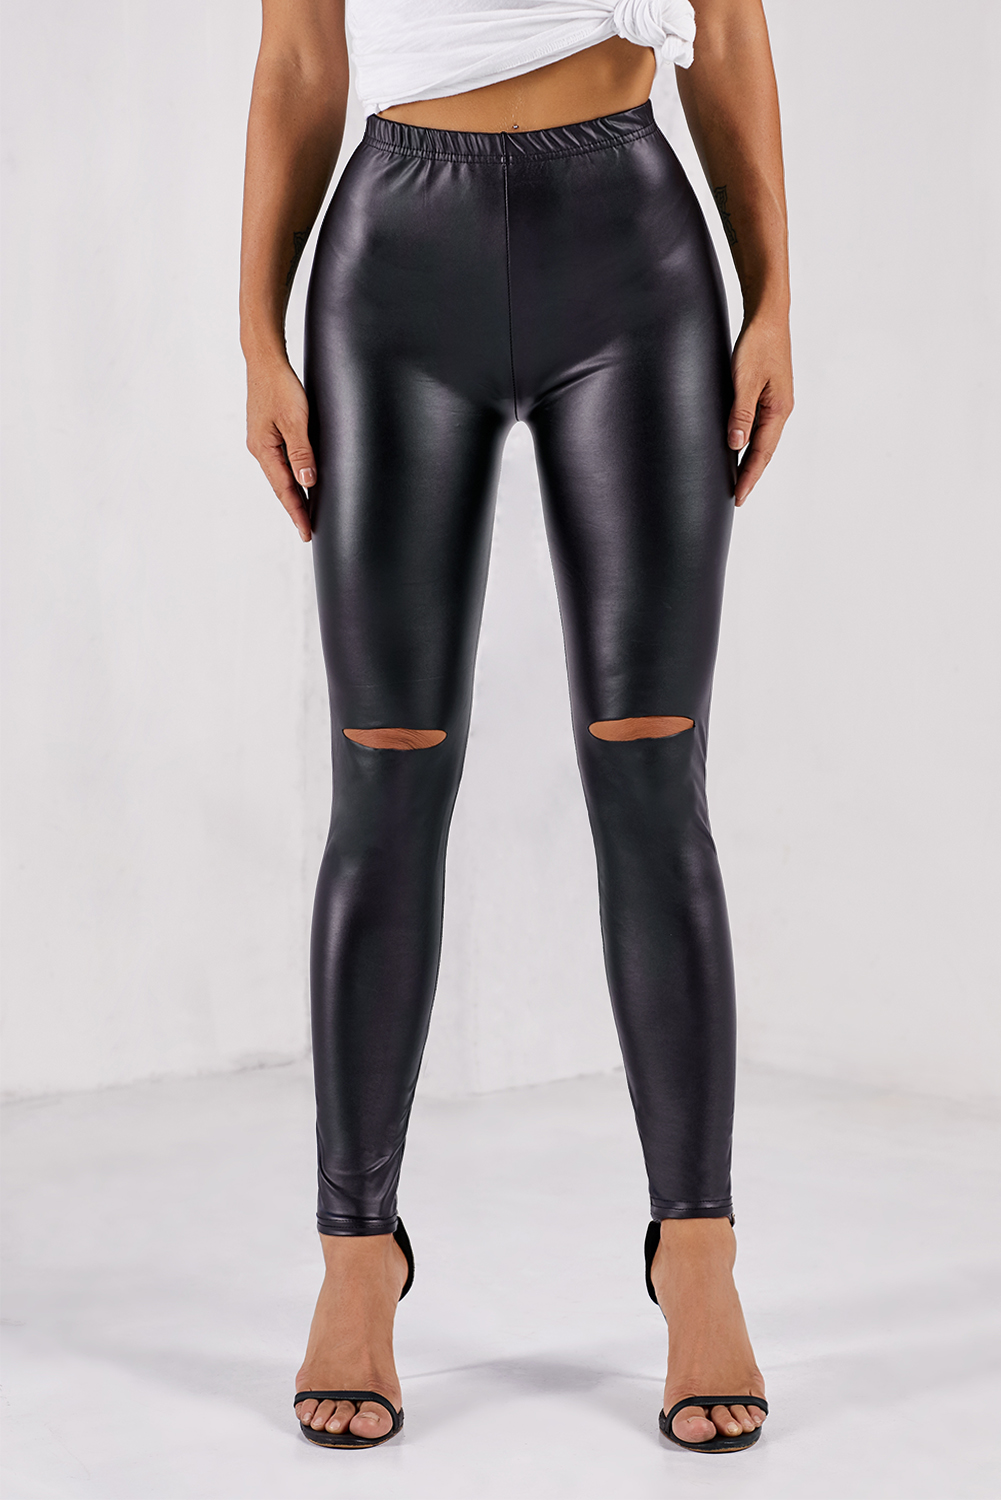 Buy SEASUMFaux Leather Leggings for Women Stretchy High Waisted Butt  Lifting Black Pleather Pants Outfit Sexy PU Leggings Tights Online at  desertcartINDIA